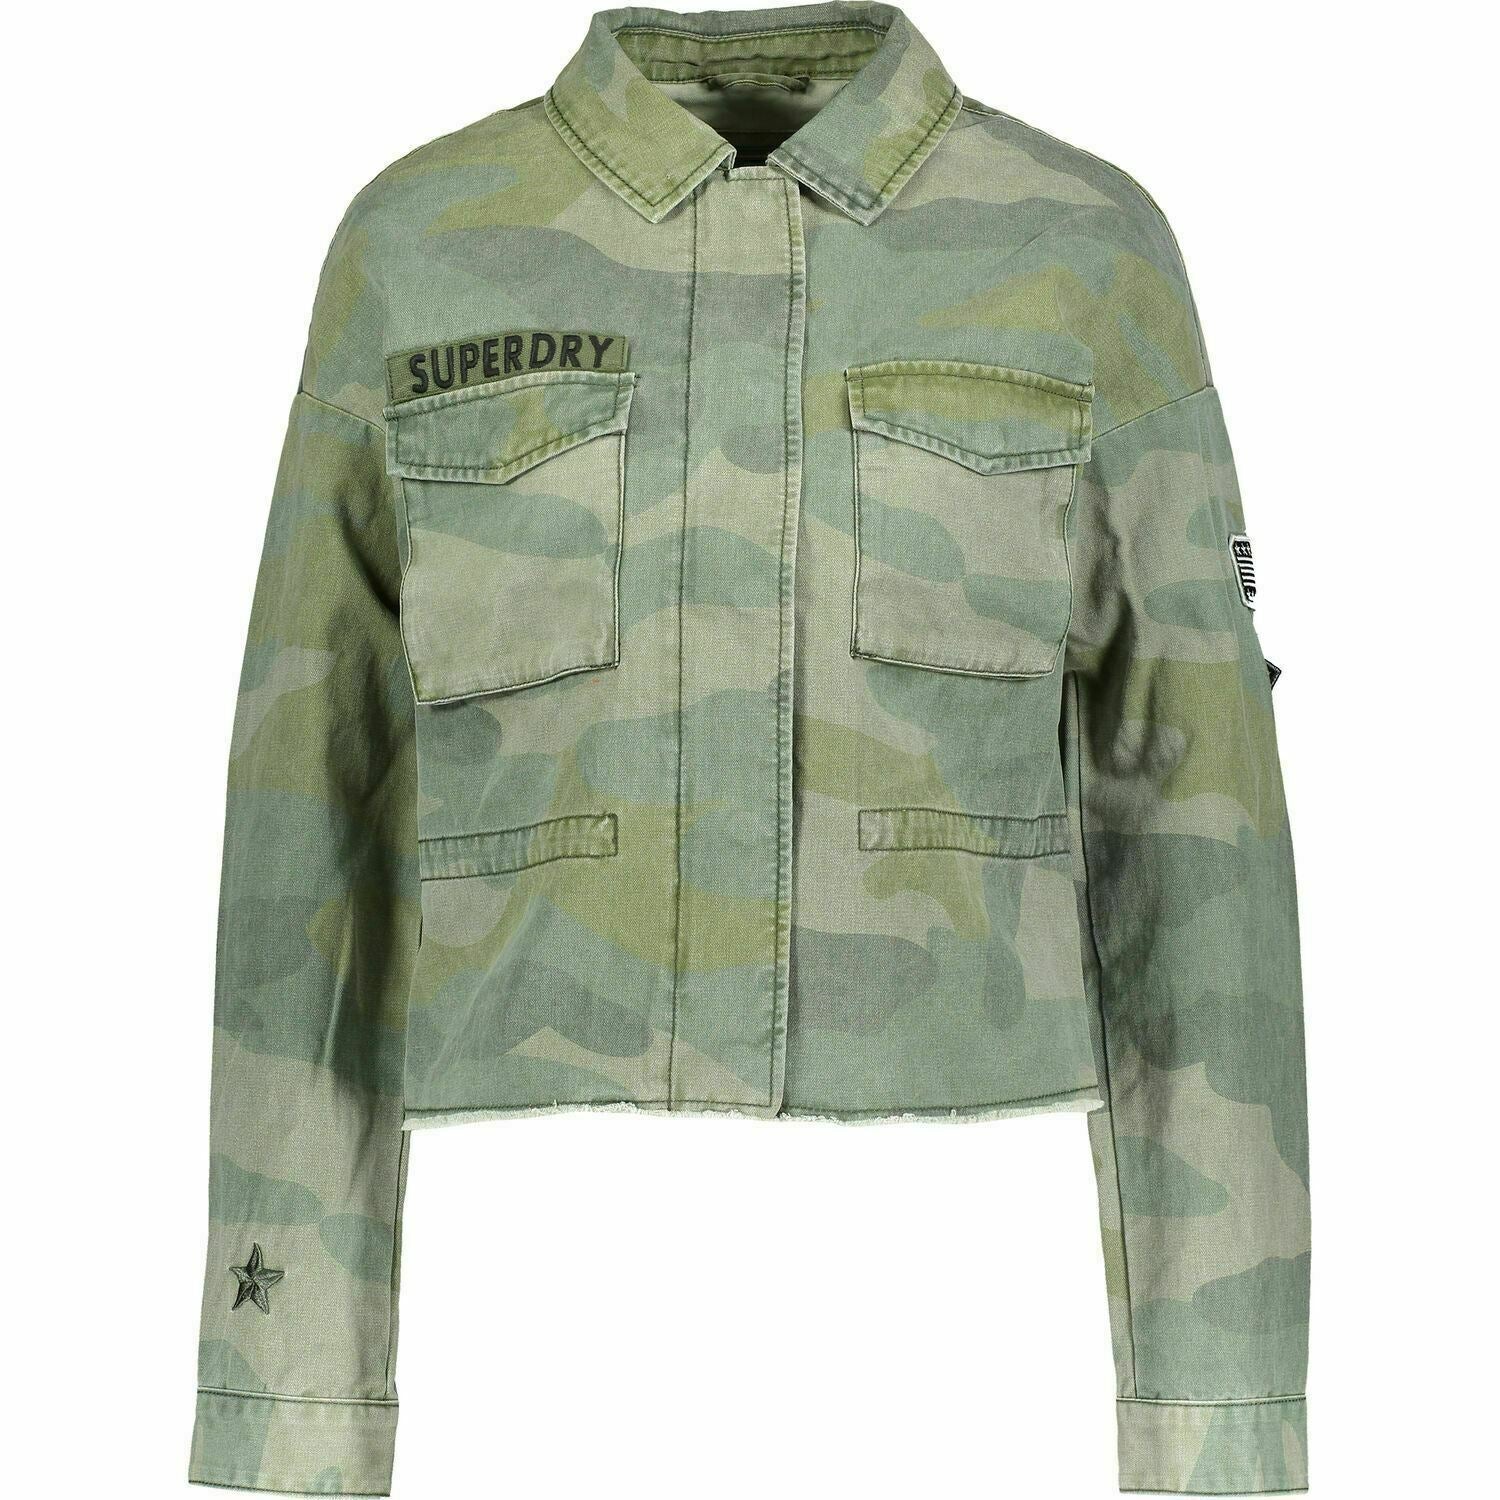 SUPERDRY Women's Crop Utility Jacket, Washed Green Camo, size L / UK 14